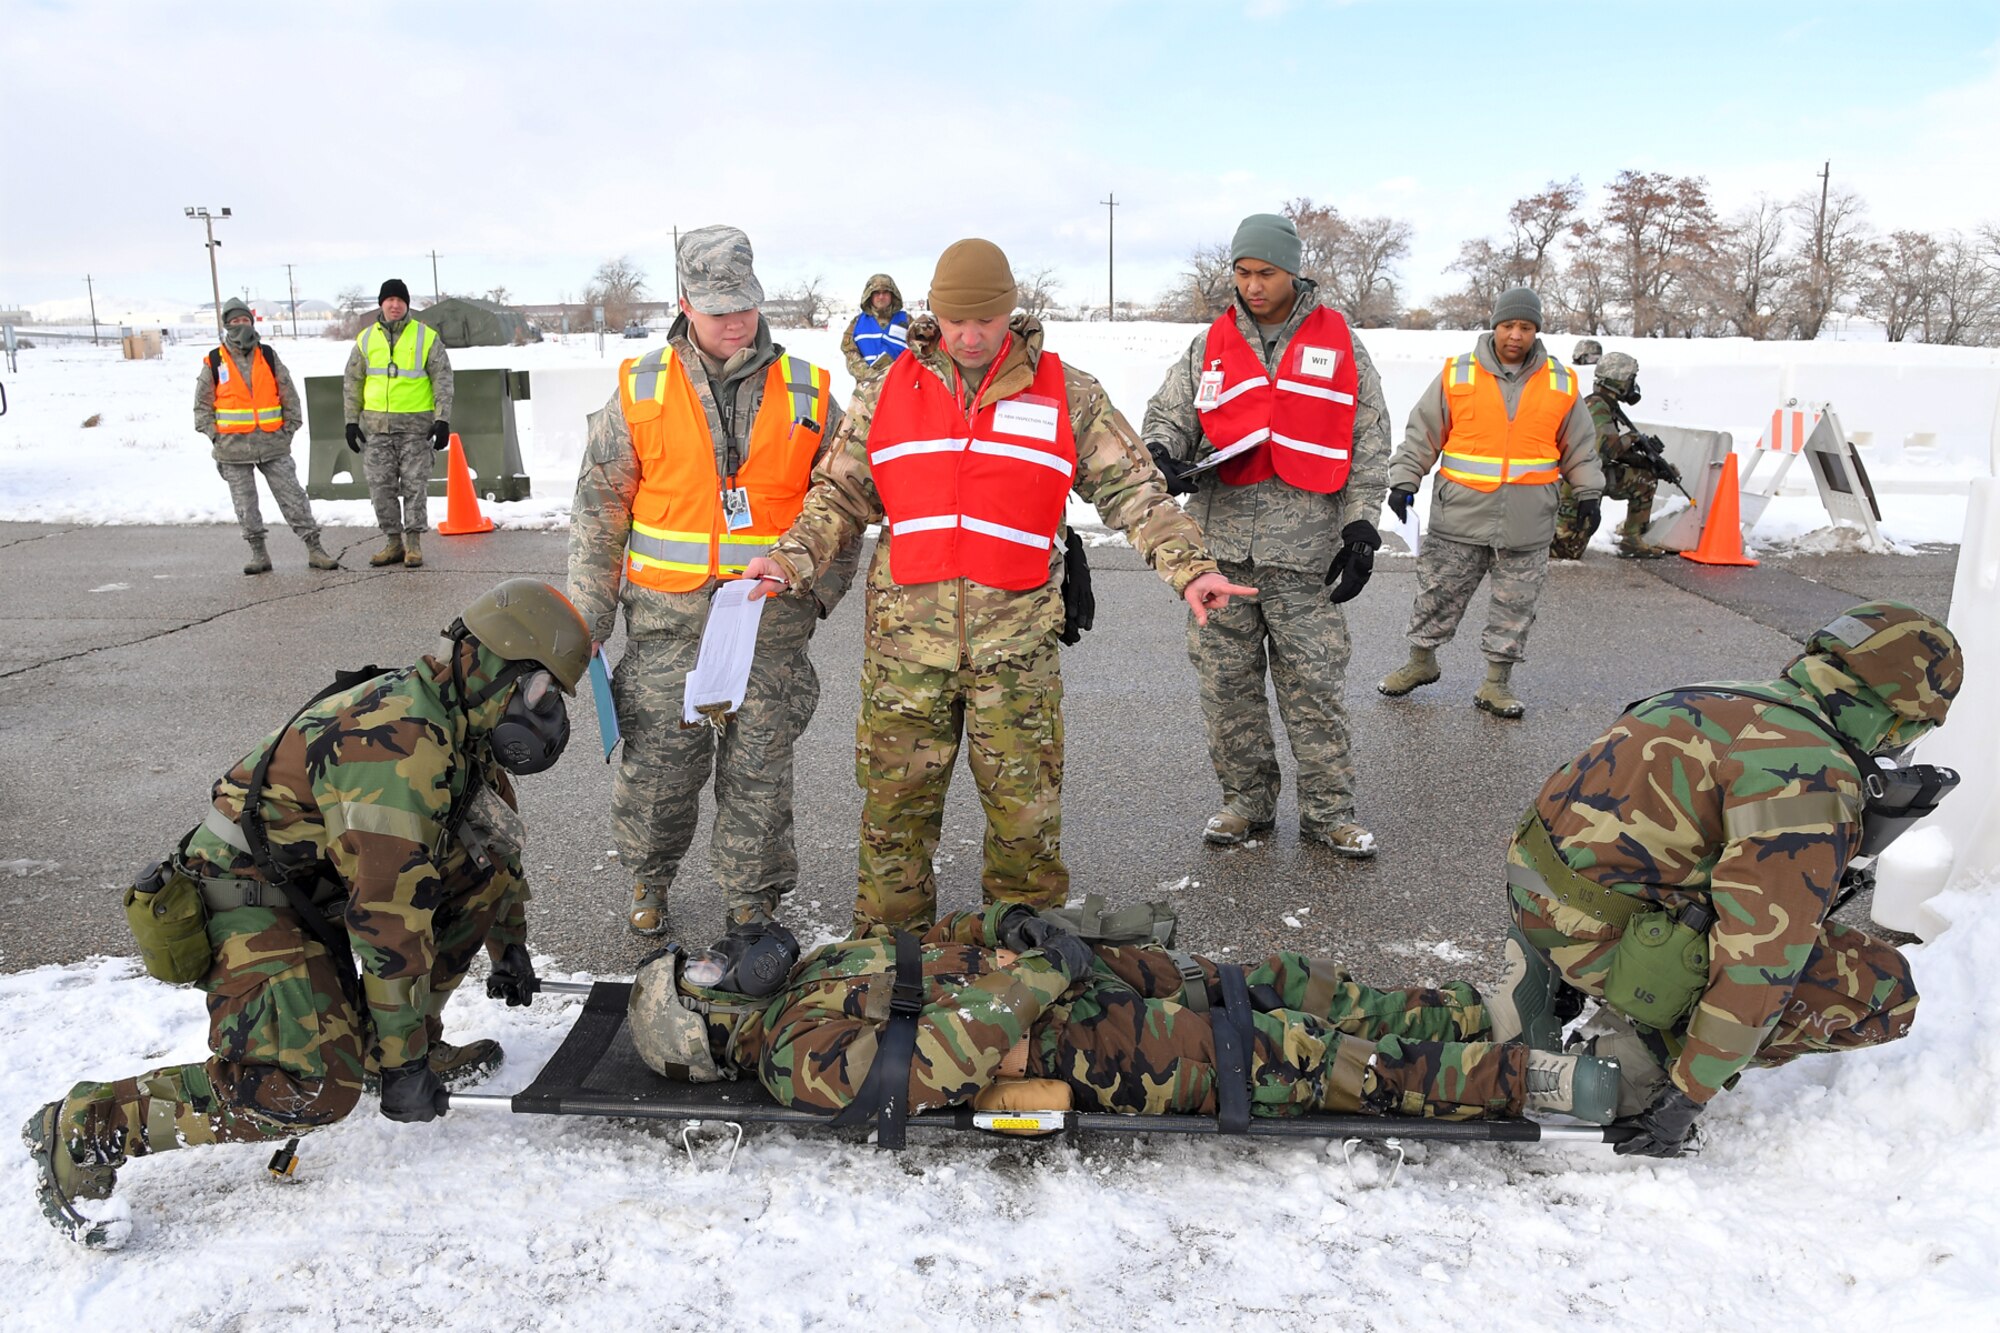 Wing inspection team members evaluated Airmen carrying a patient with simulated injuries during a readiness exercise, Feb. 7, 2019, at Hill Air Force Base, Utah. During the exercise, Airmen donned mission-oriented projective posture, or MOPP, gear and were assessed on performing different tasks in a simulated toxic environment to improve their operational readiness. (U.S. Air Force photo by Todd Cromar)